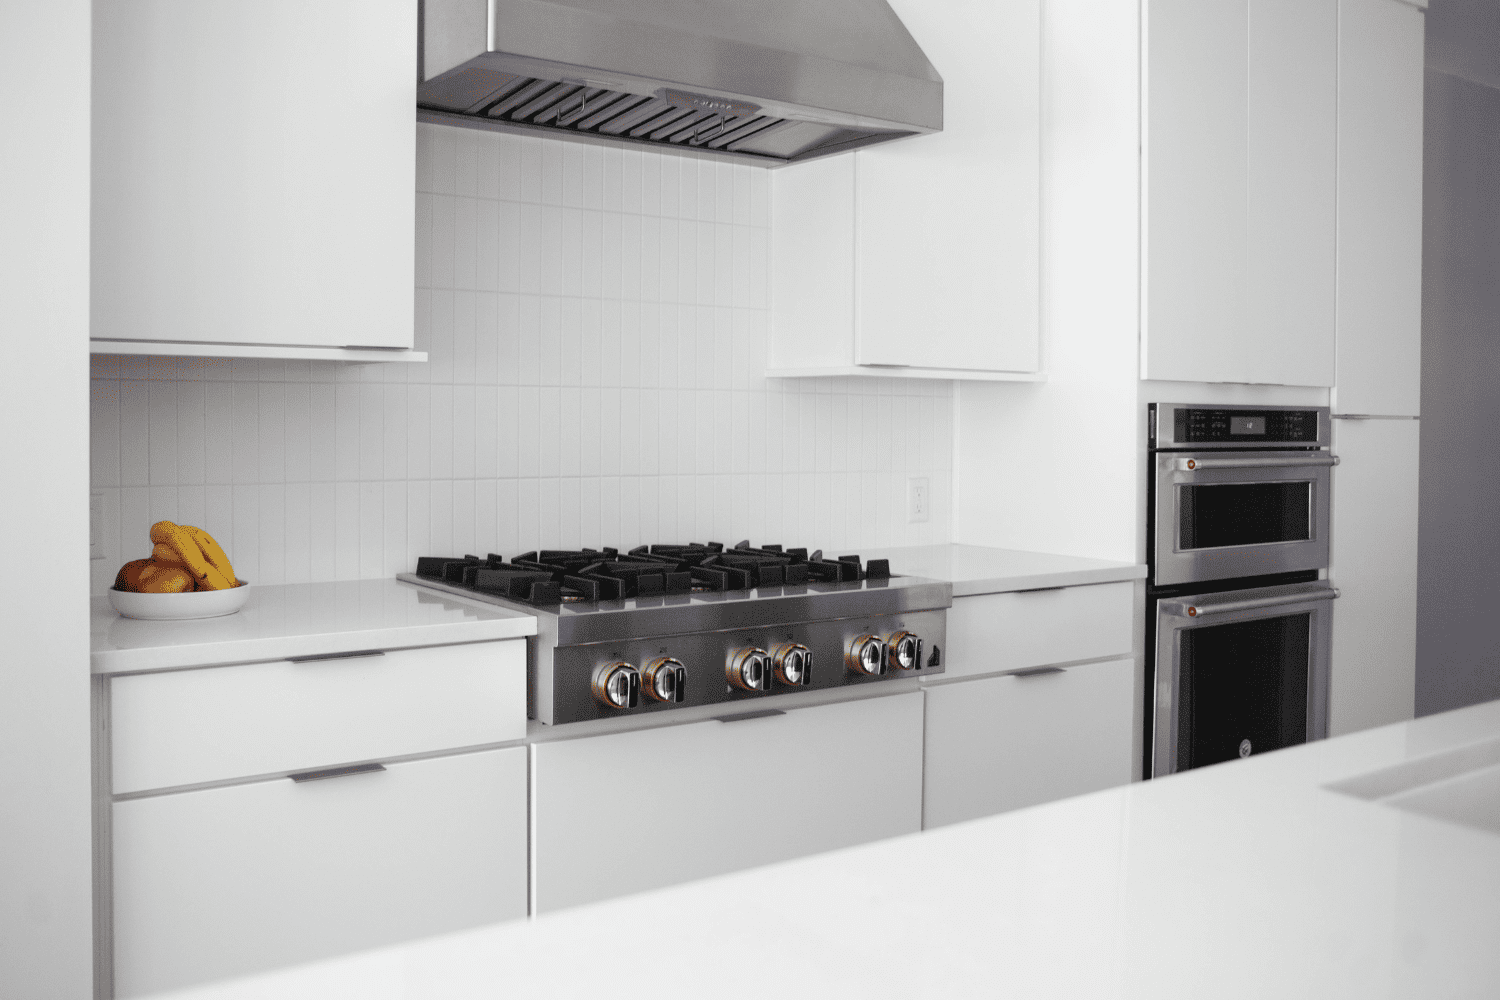 Nicholas Design Build | A white kitchen with a stove and oven.